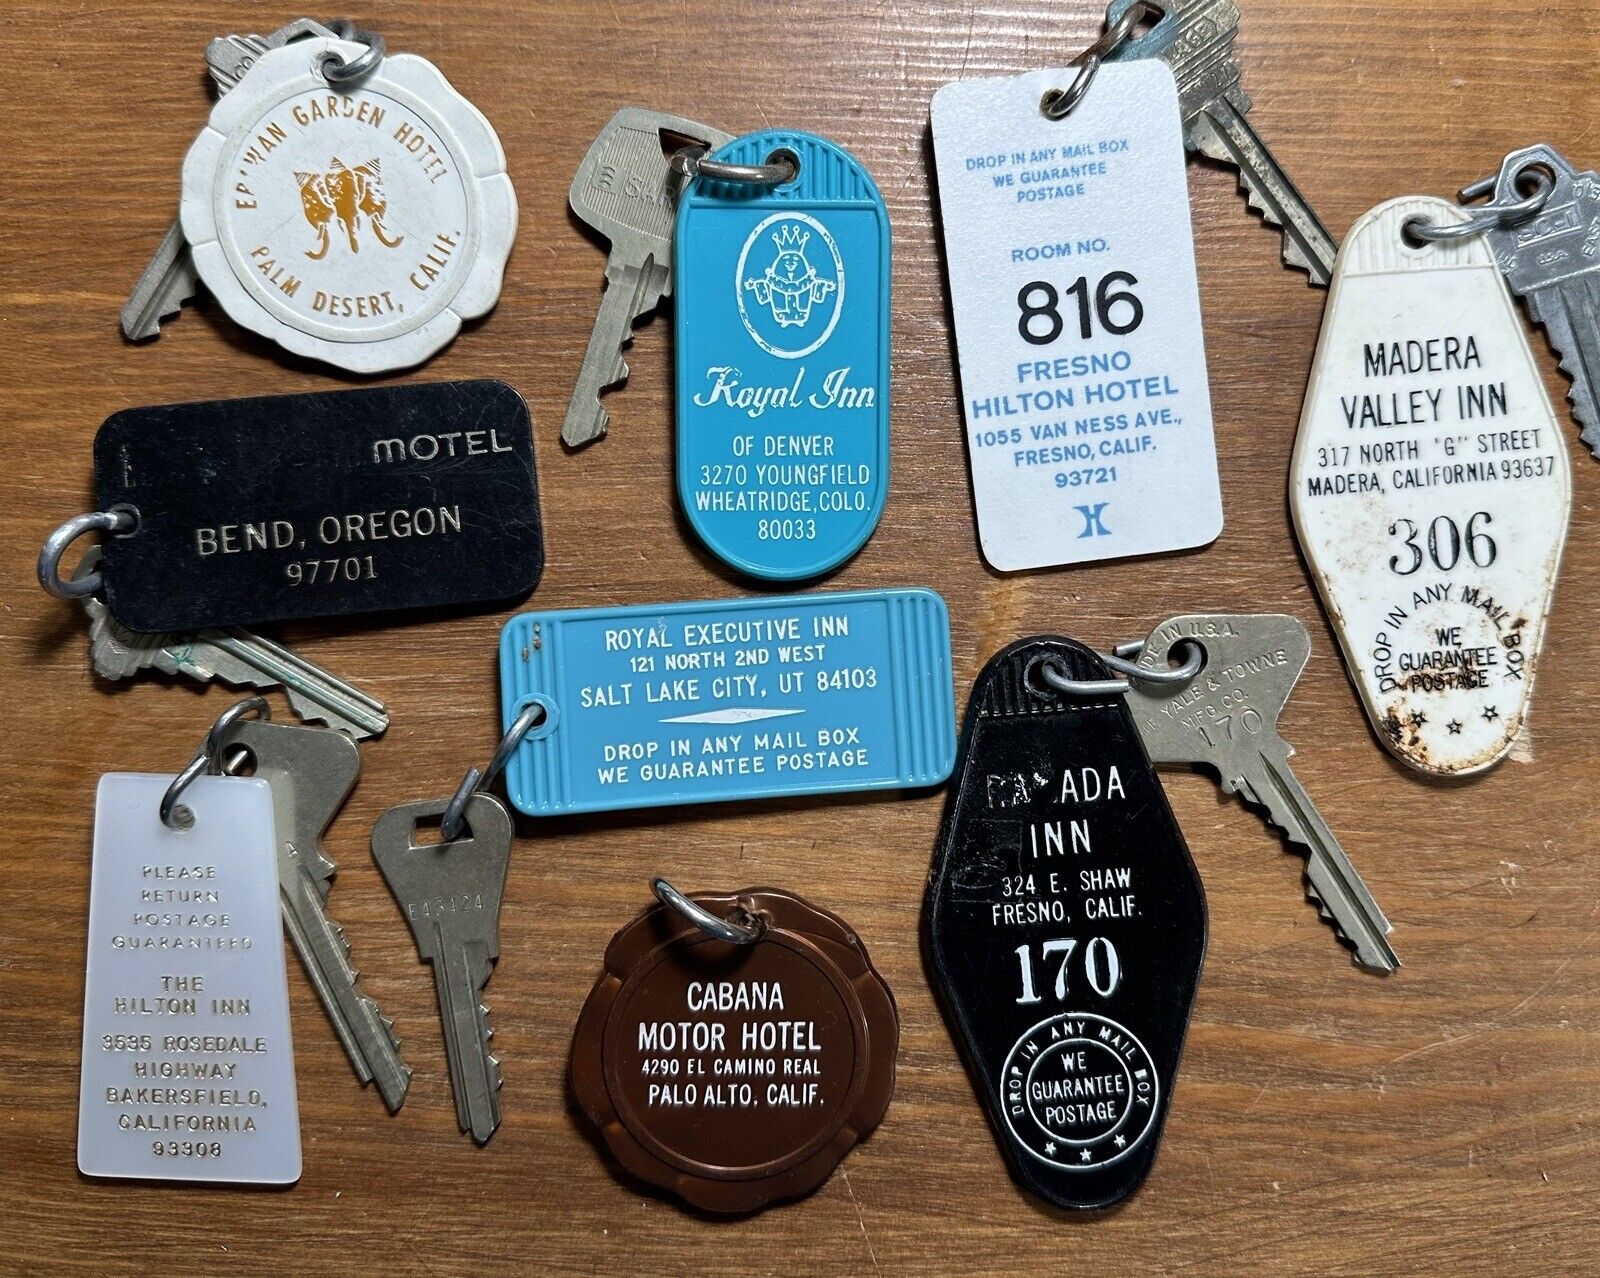 Vintage 1960s/70s Hotel Motel Room Keys & Fobs Mixed Lot Collection #4